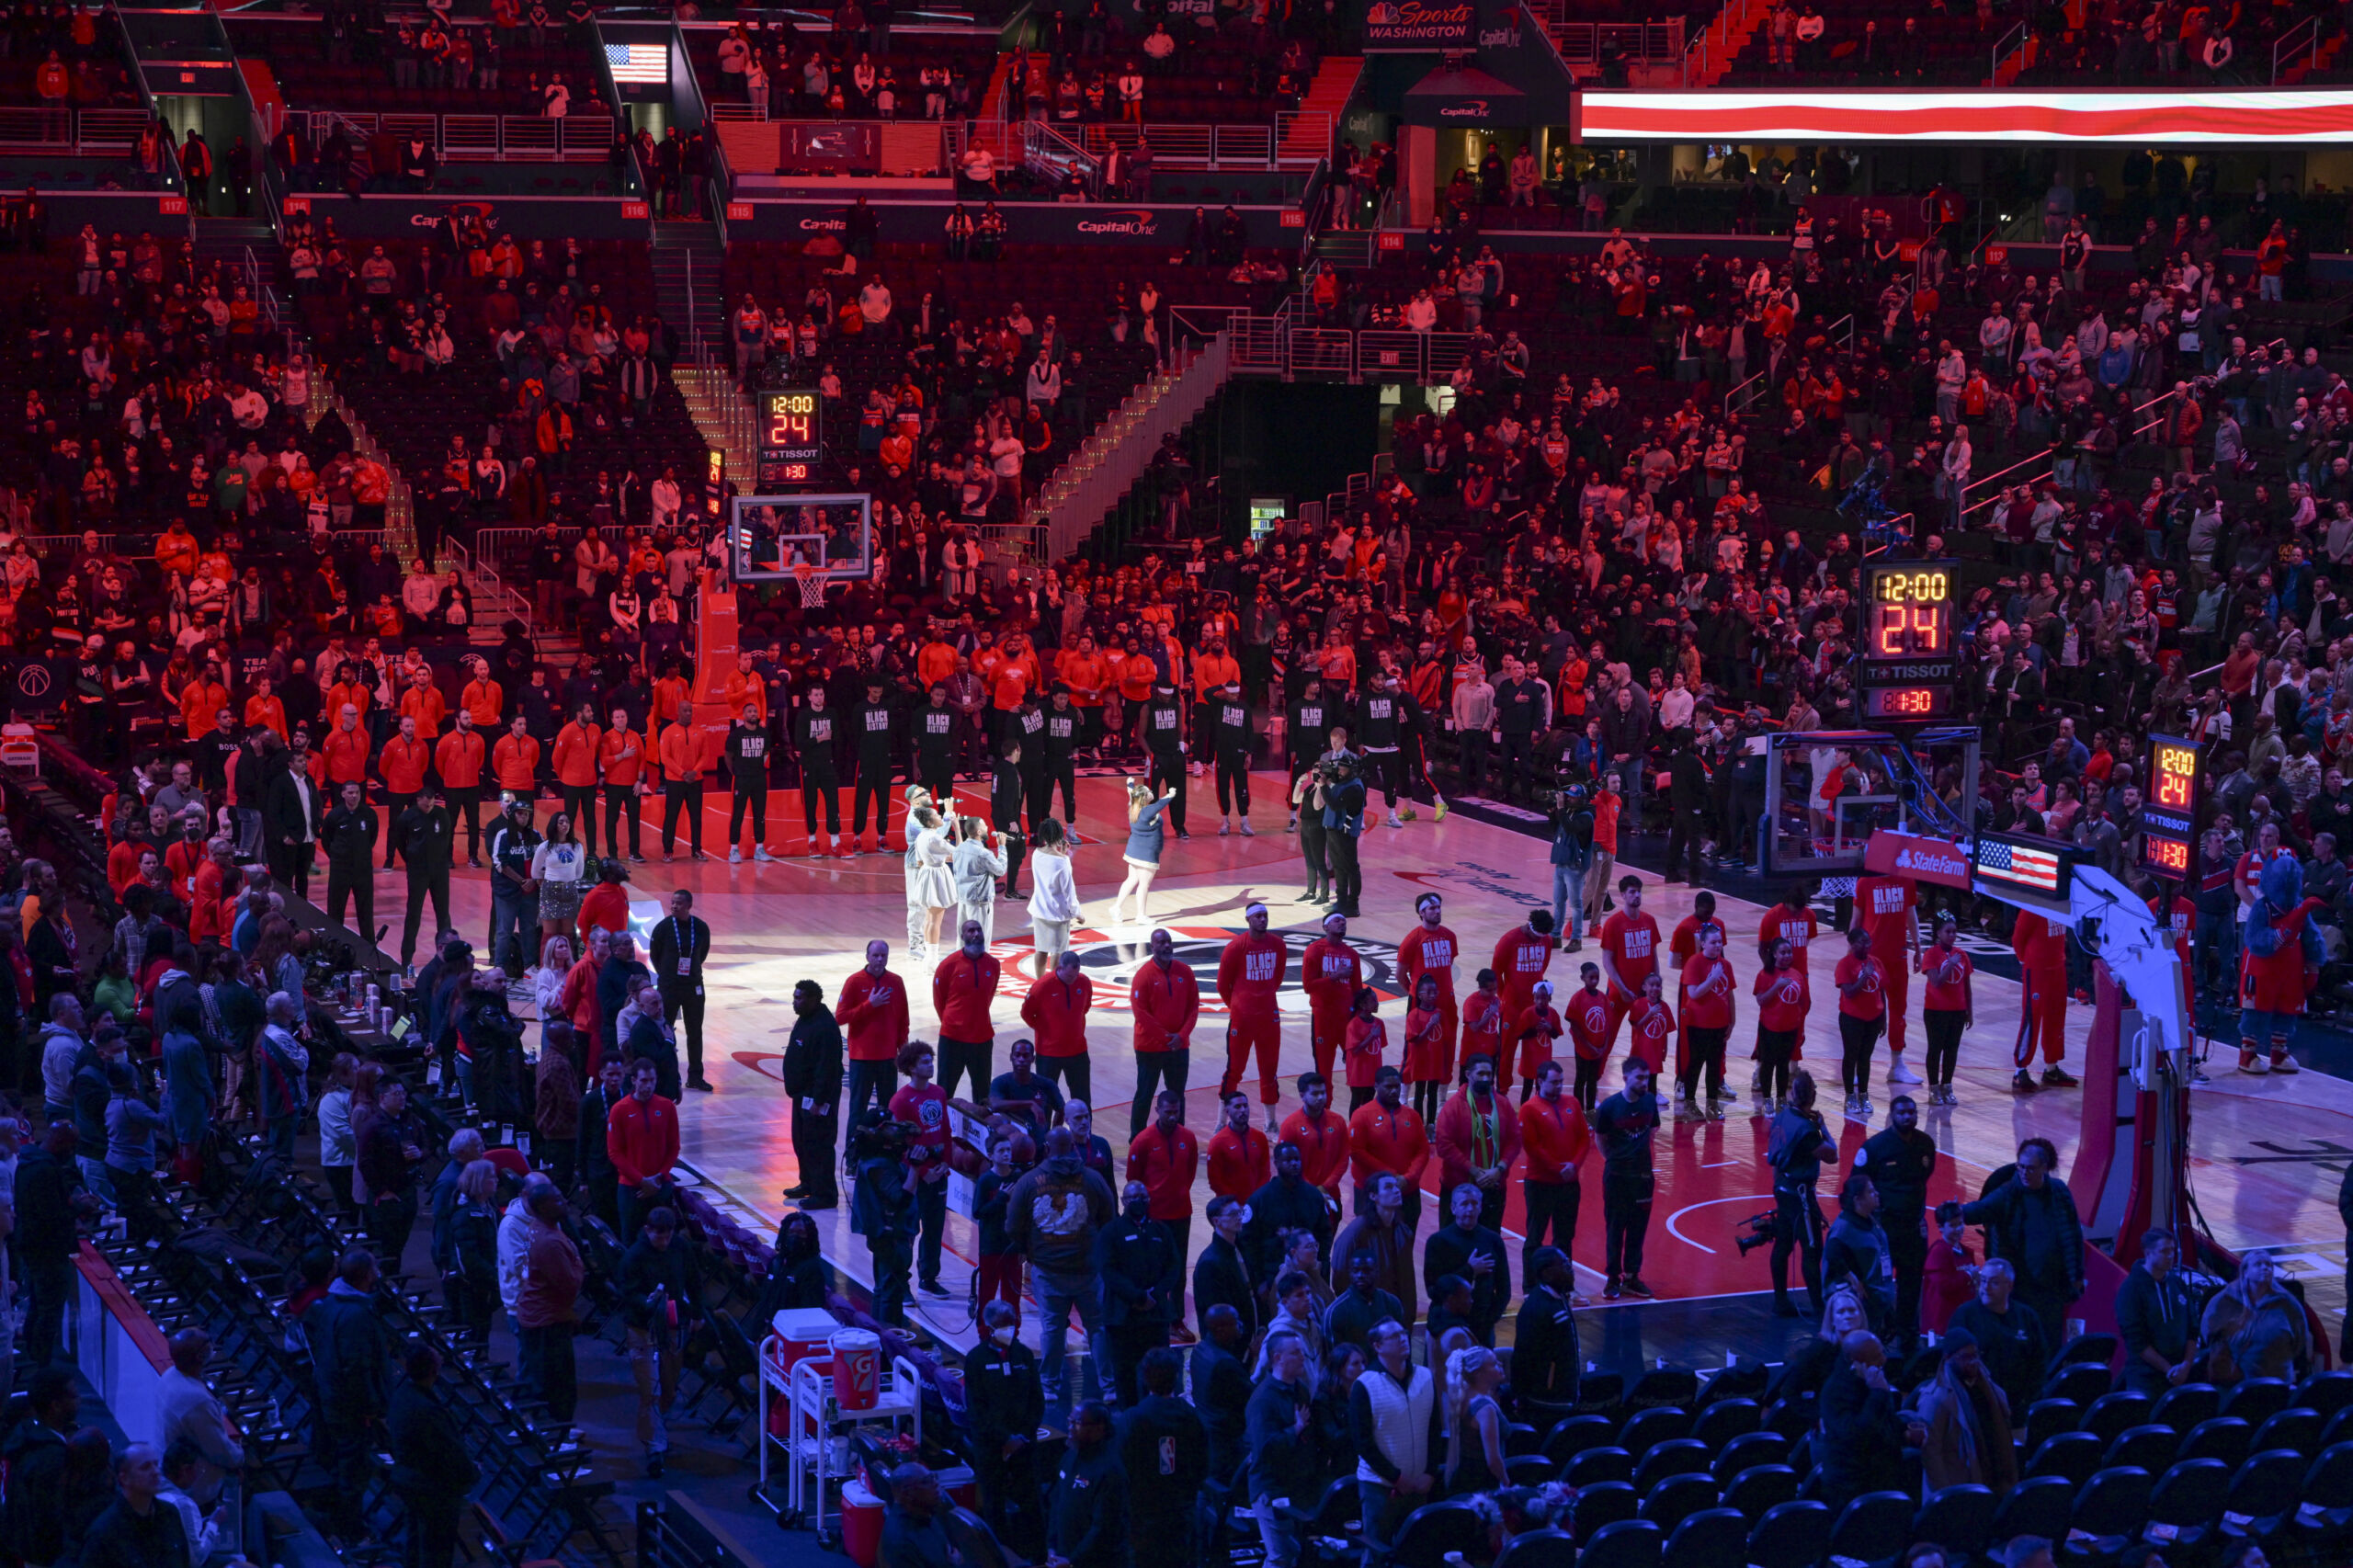 Capital One crowd capacity will be 50 percent for Wizards in